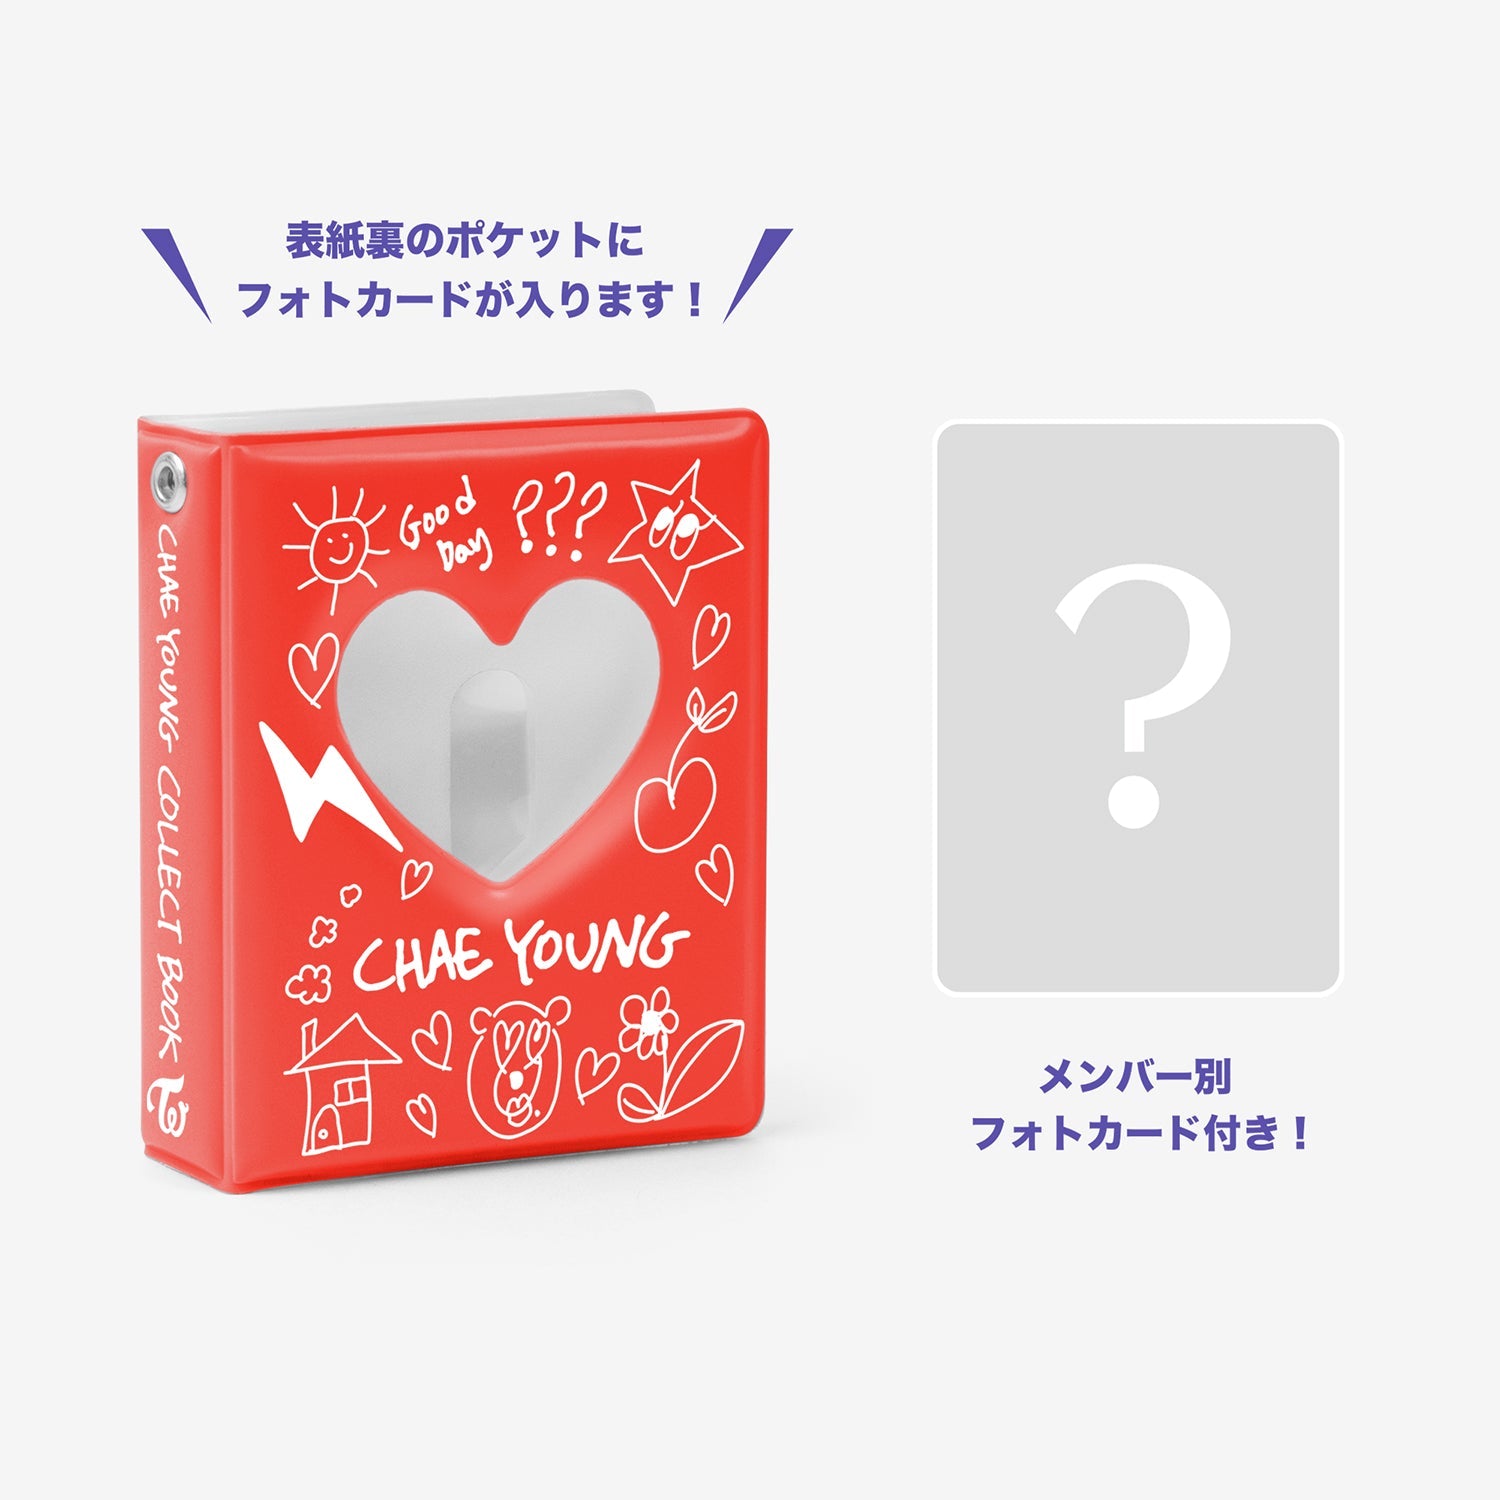 COLLECT BOOK Designed by CHAEYOUNG / TWICE『JAPAN DEBUT 7th Anniversary』